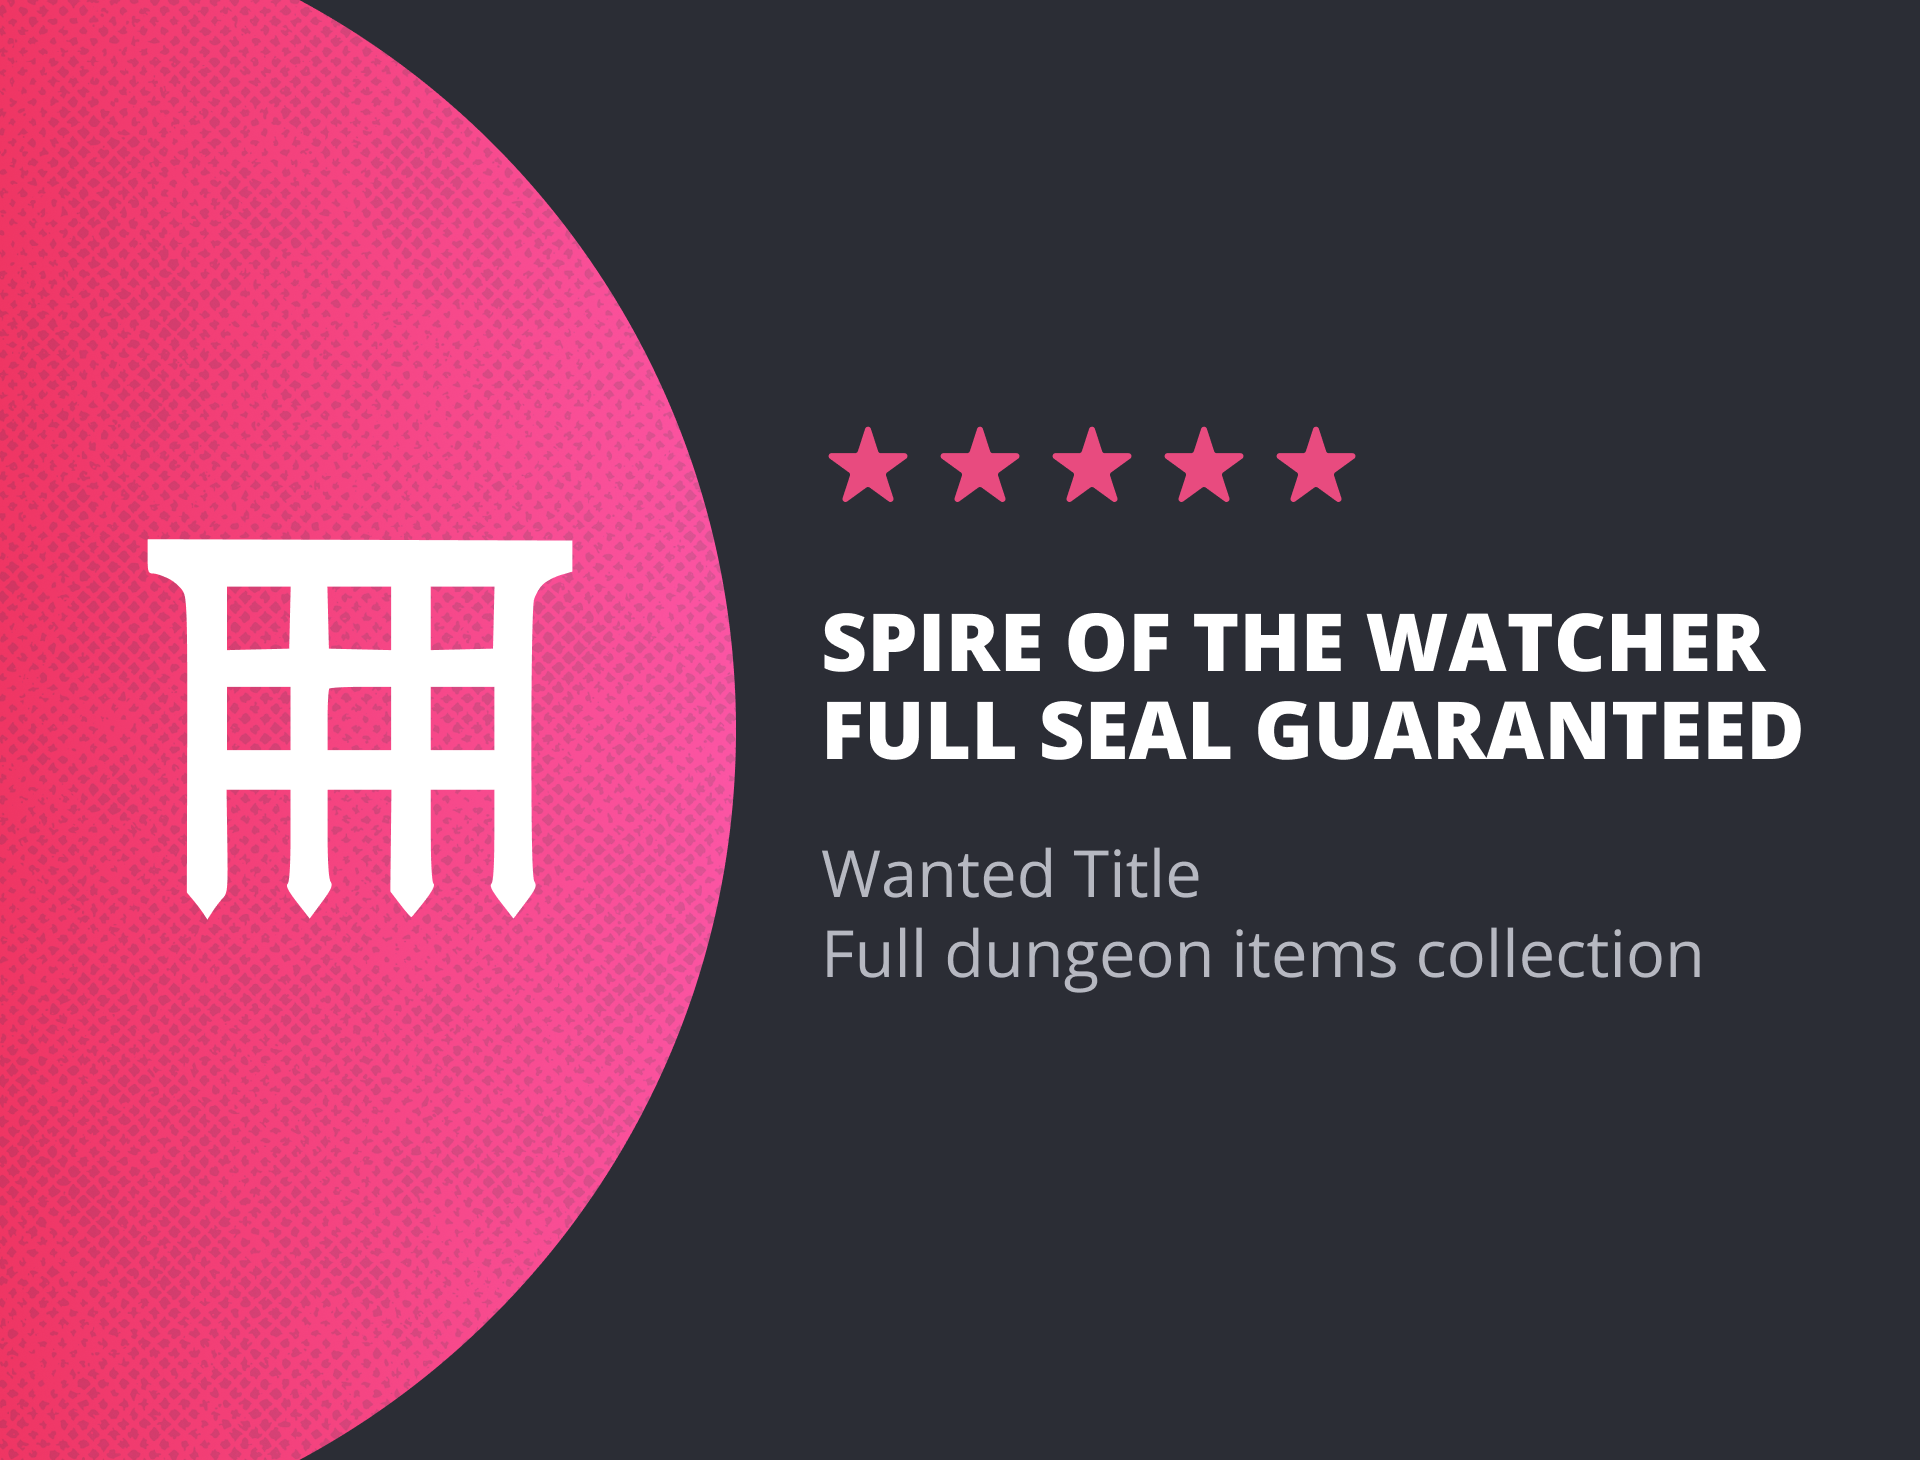 Spire of the Watcher Full Seal (Wanted Title)